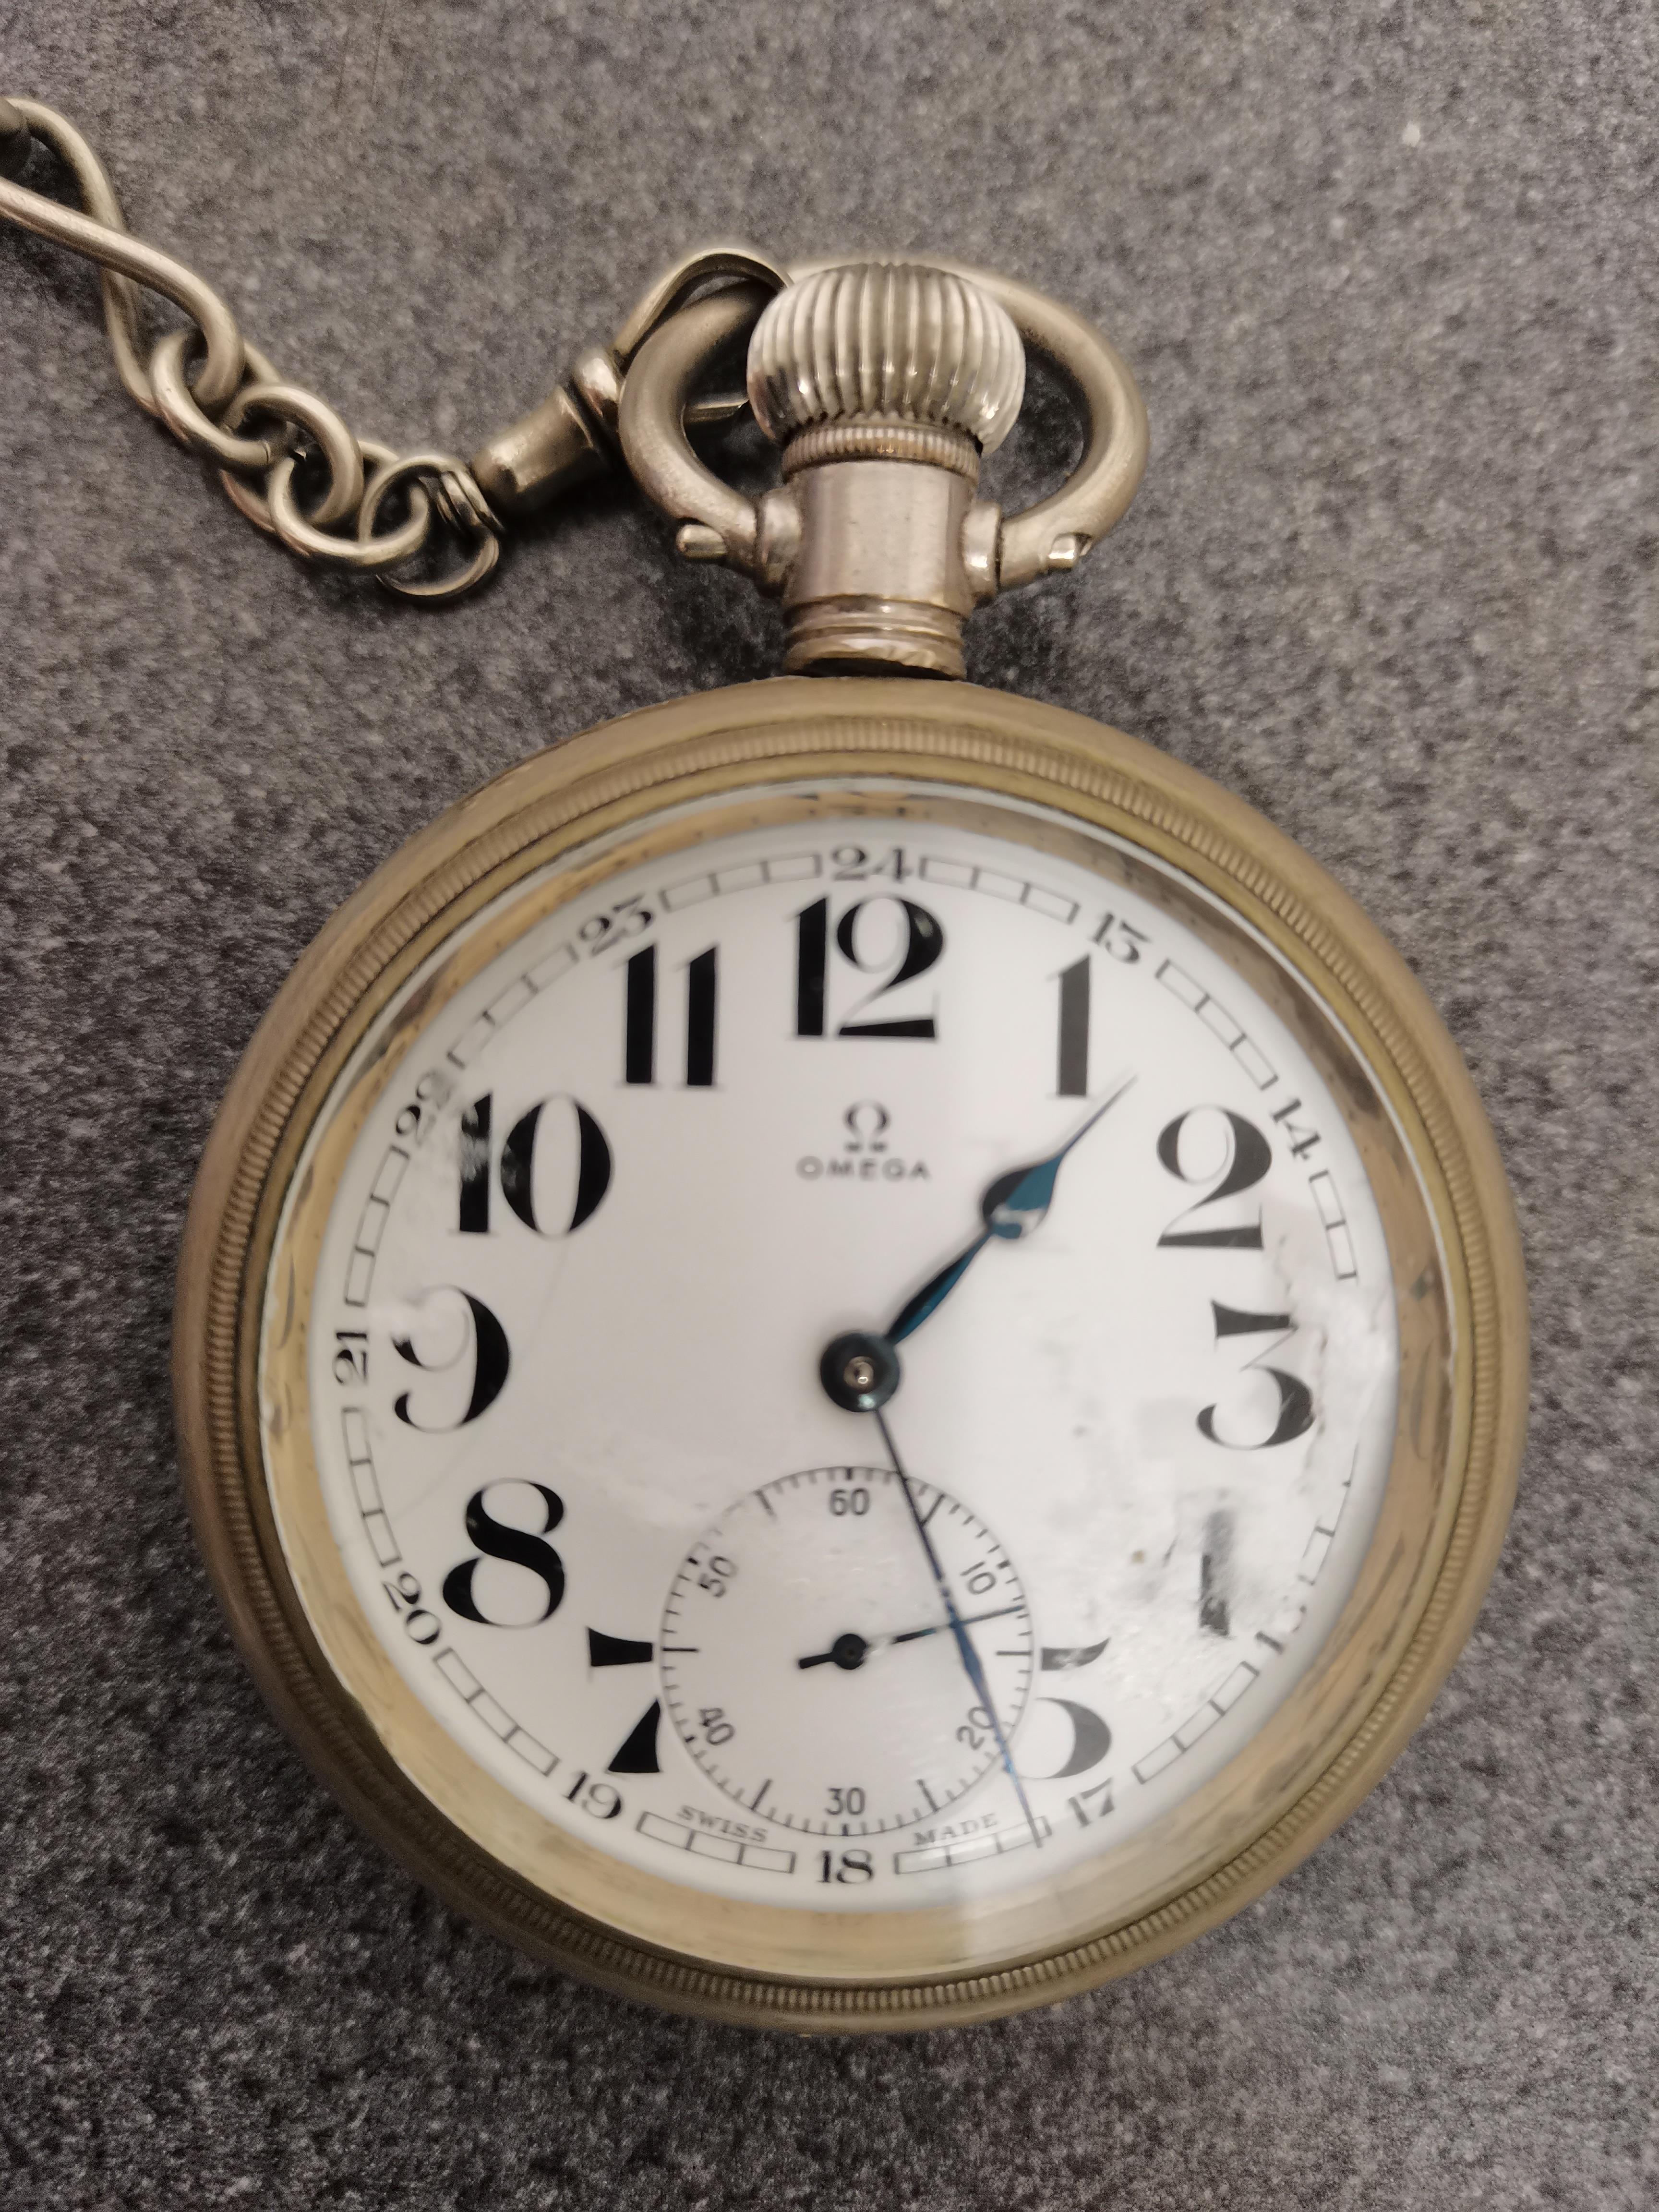 Silver OMEGA pocket watch with chain - Image 2 of 4